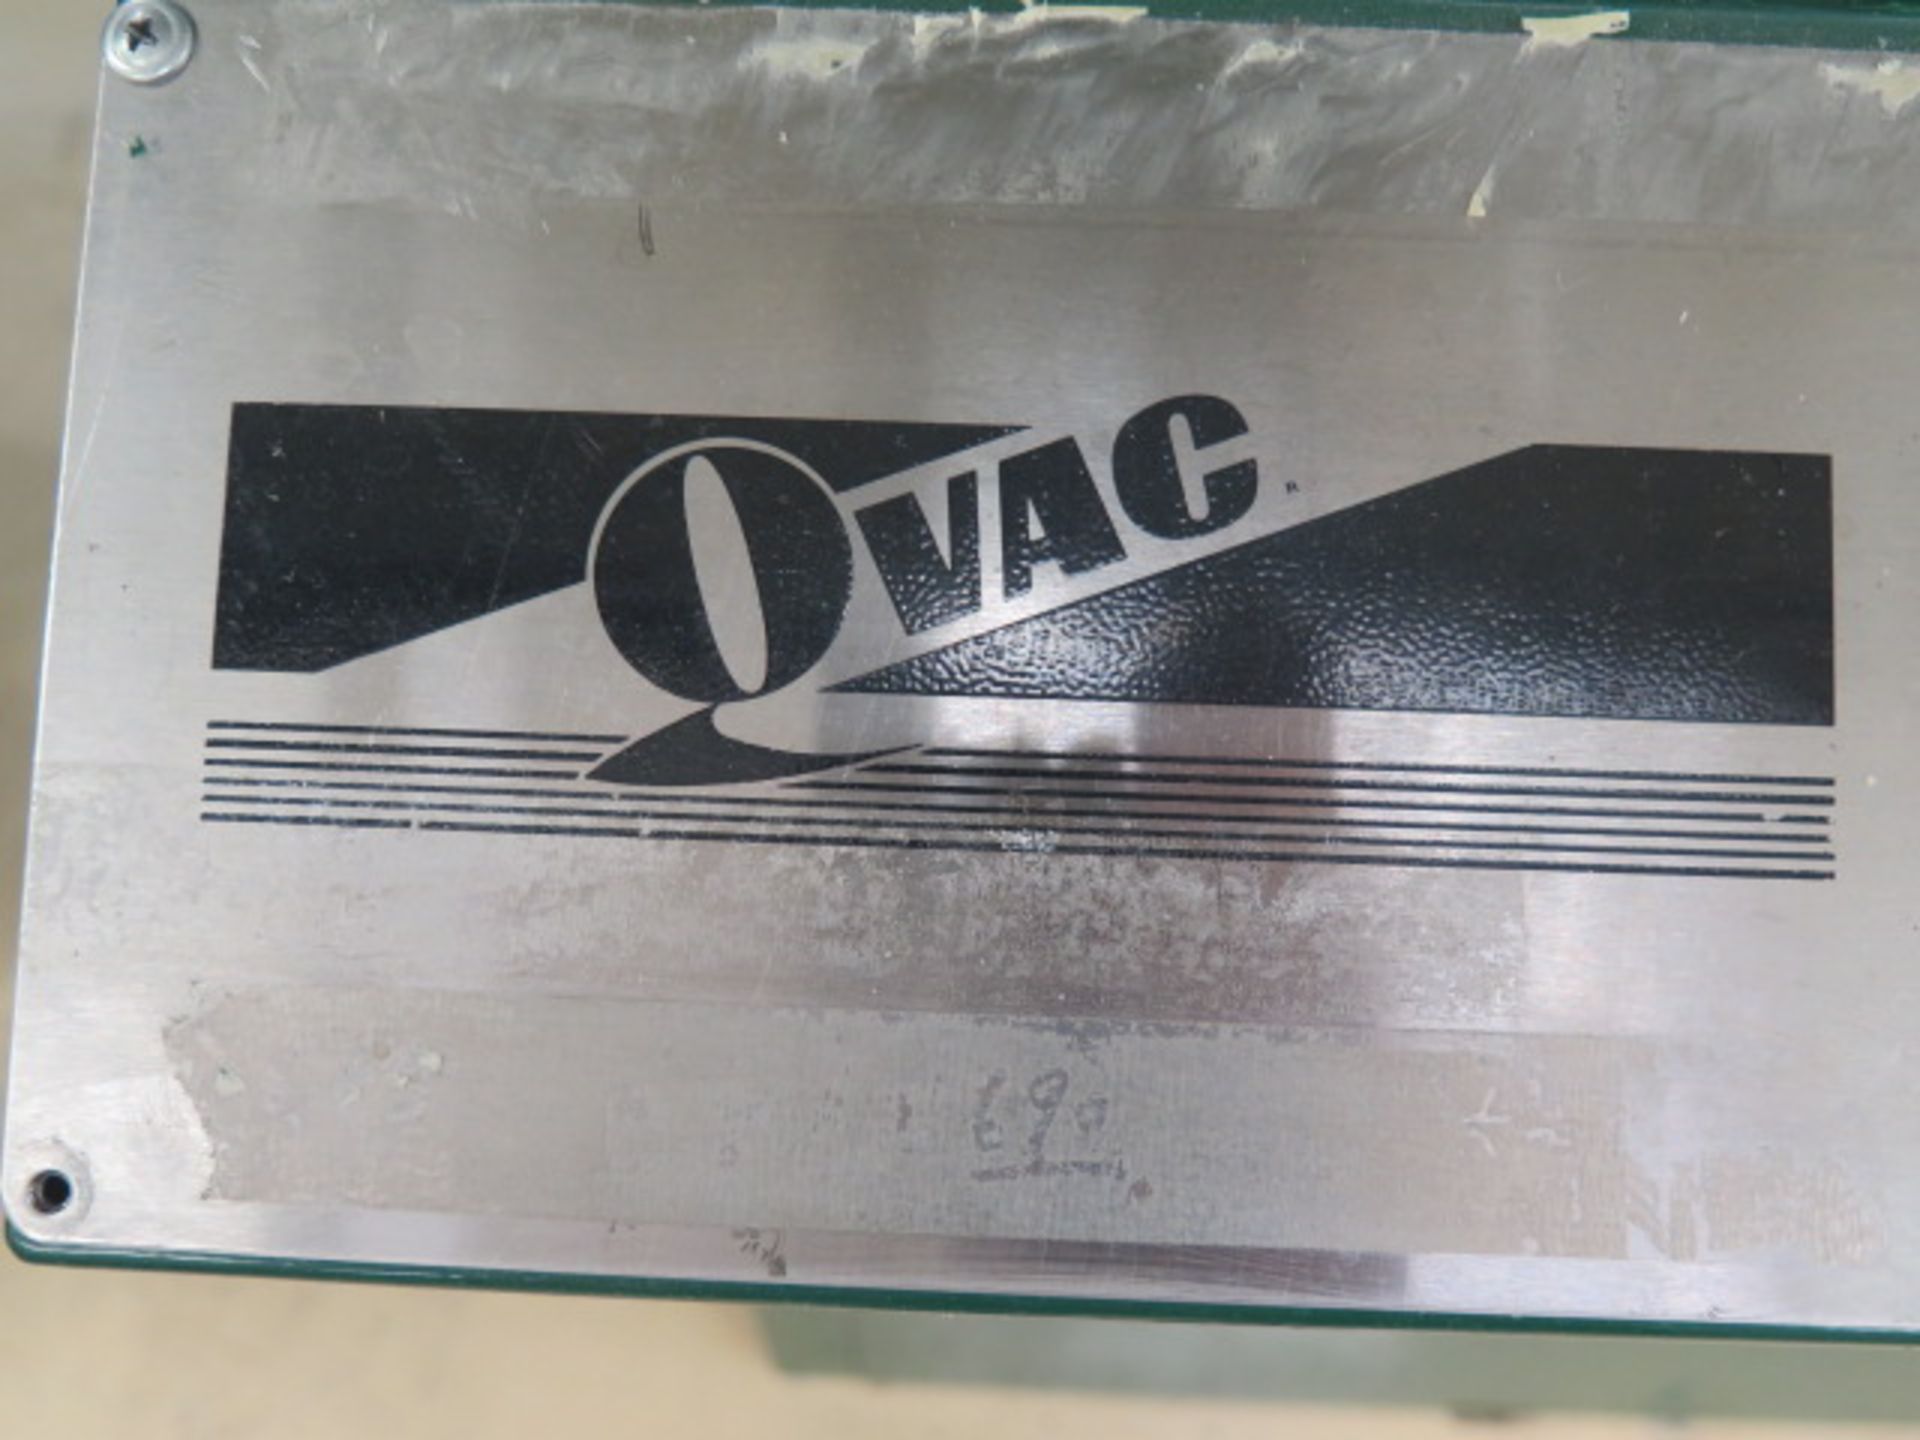 Q-Vac mdl. PC1824PD 18” x 24” Vacuum Packaging Machine s/n 220602 w/ Cooling Blower - Image 3 of 10